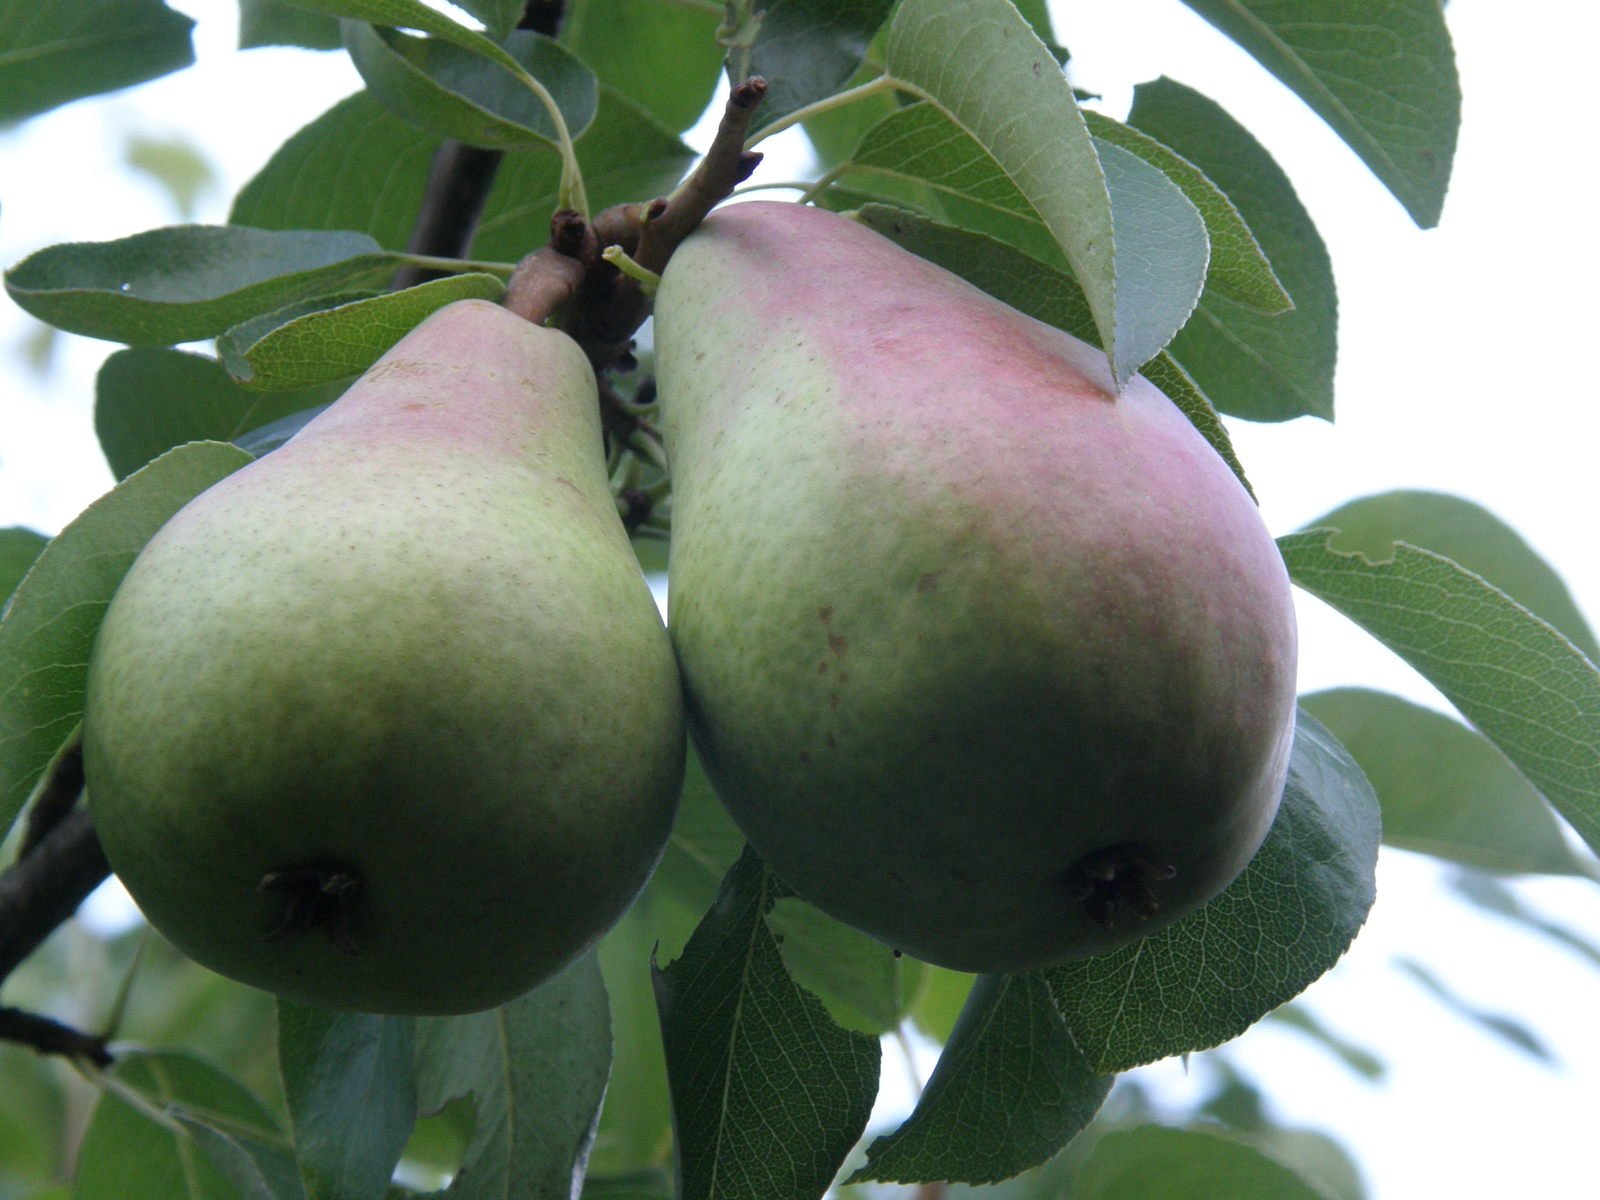 several green pears on a tree nch with some leaves